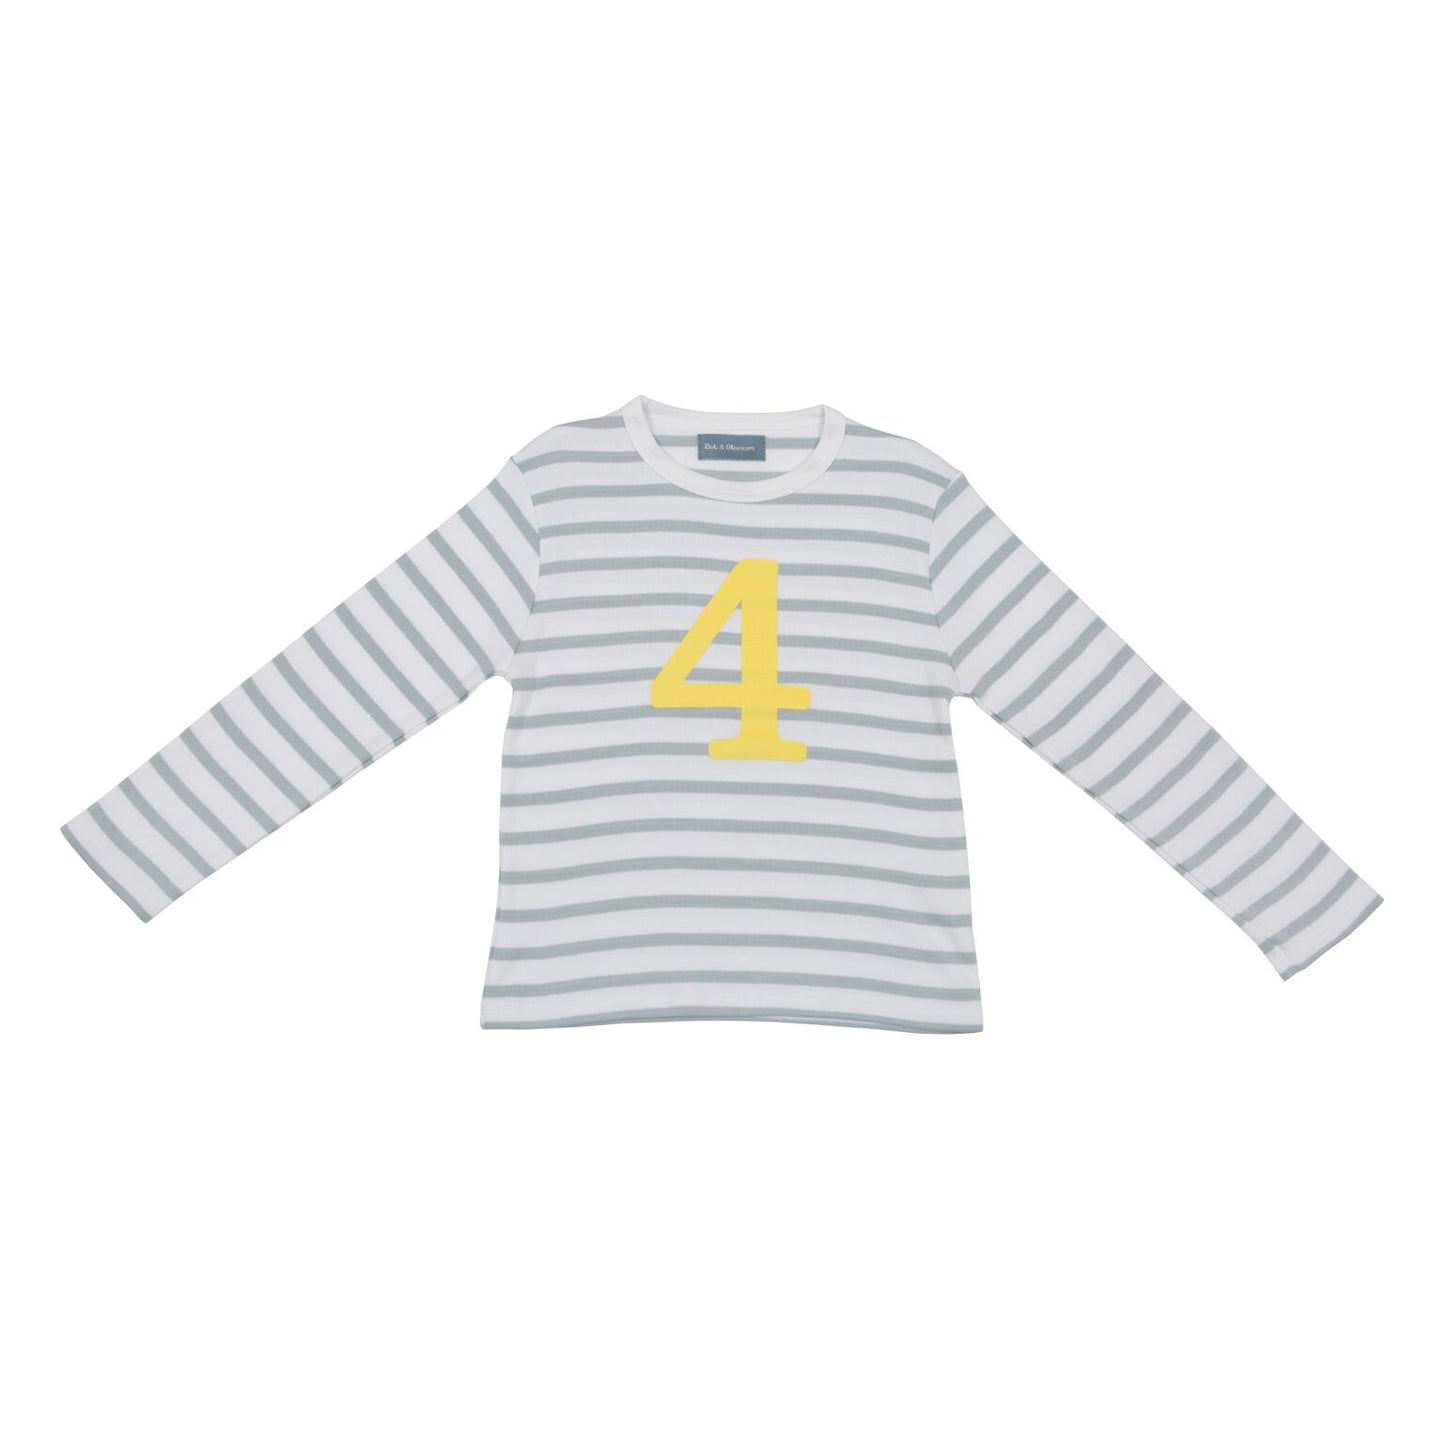 Bob & Blossom grey and white striped long sleeved t shirt with yellow number 4